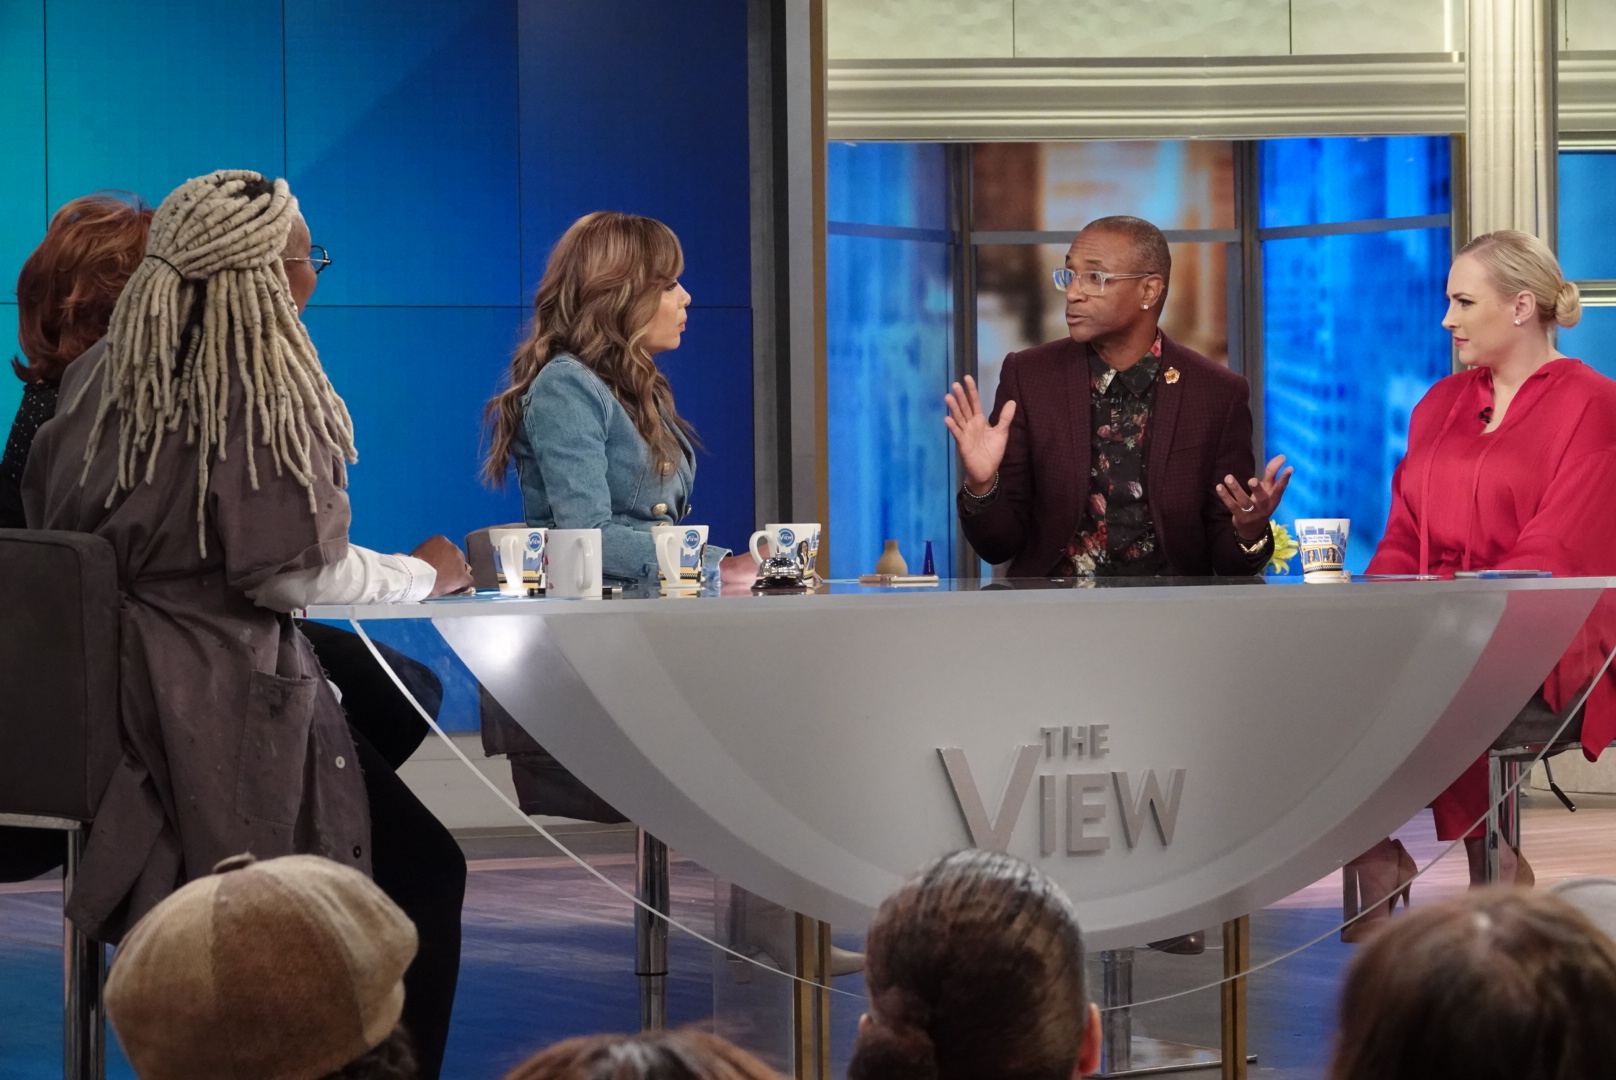 PHOTO: Tommy Davidson discusses his time on the cast of "In Living Color" with "The View" co-hosts Whoopi Goldberg, Joy Behar, Sunny Hostin, and Meghan McCain.